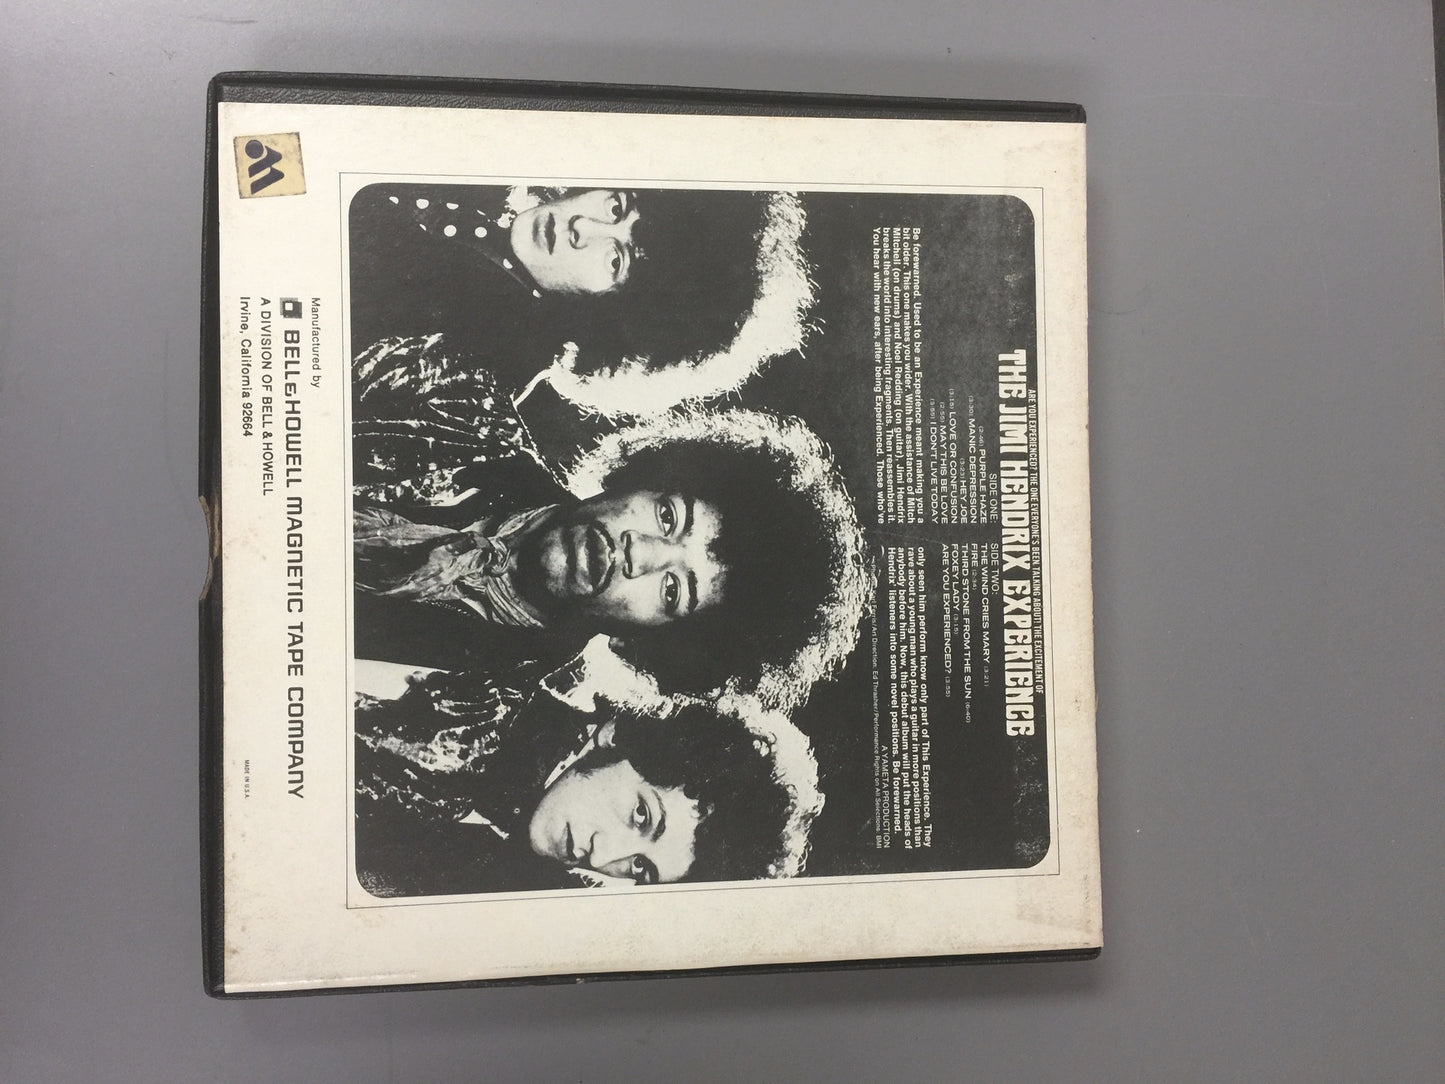 The Jimi Hendrix Experience – Are You Experienced? (reel tape)